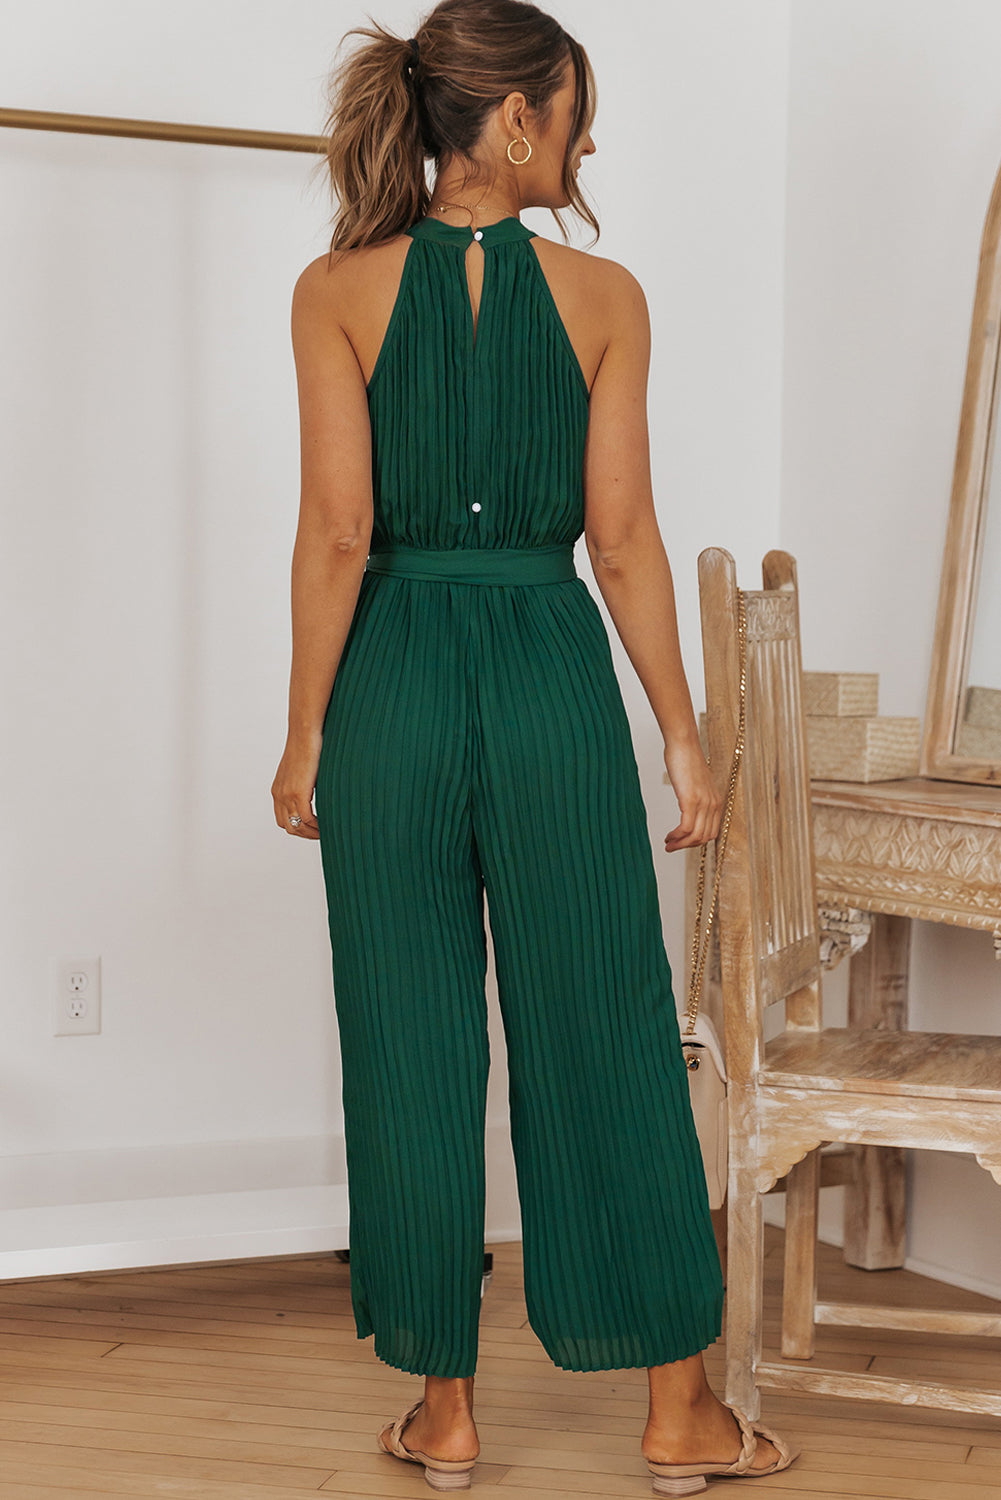 Women’s Accordion Pleated Belted Grecian Neck Sleeveless Jumpsuit